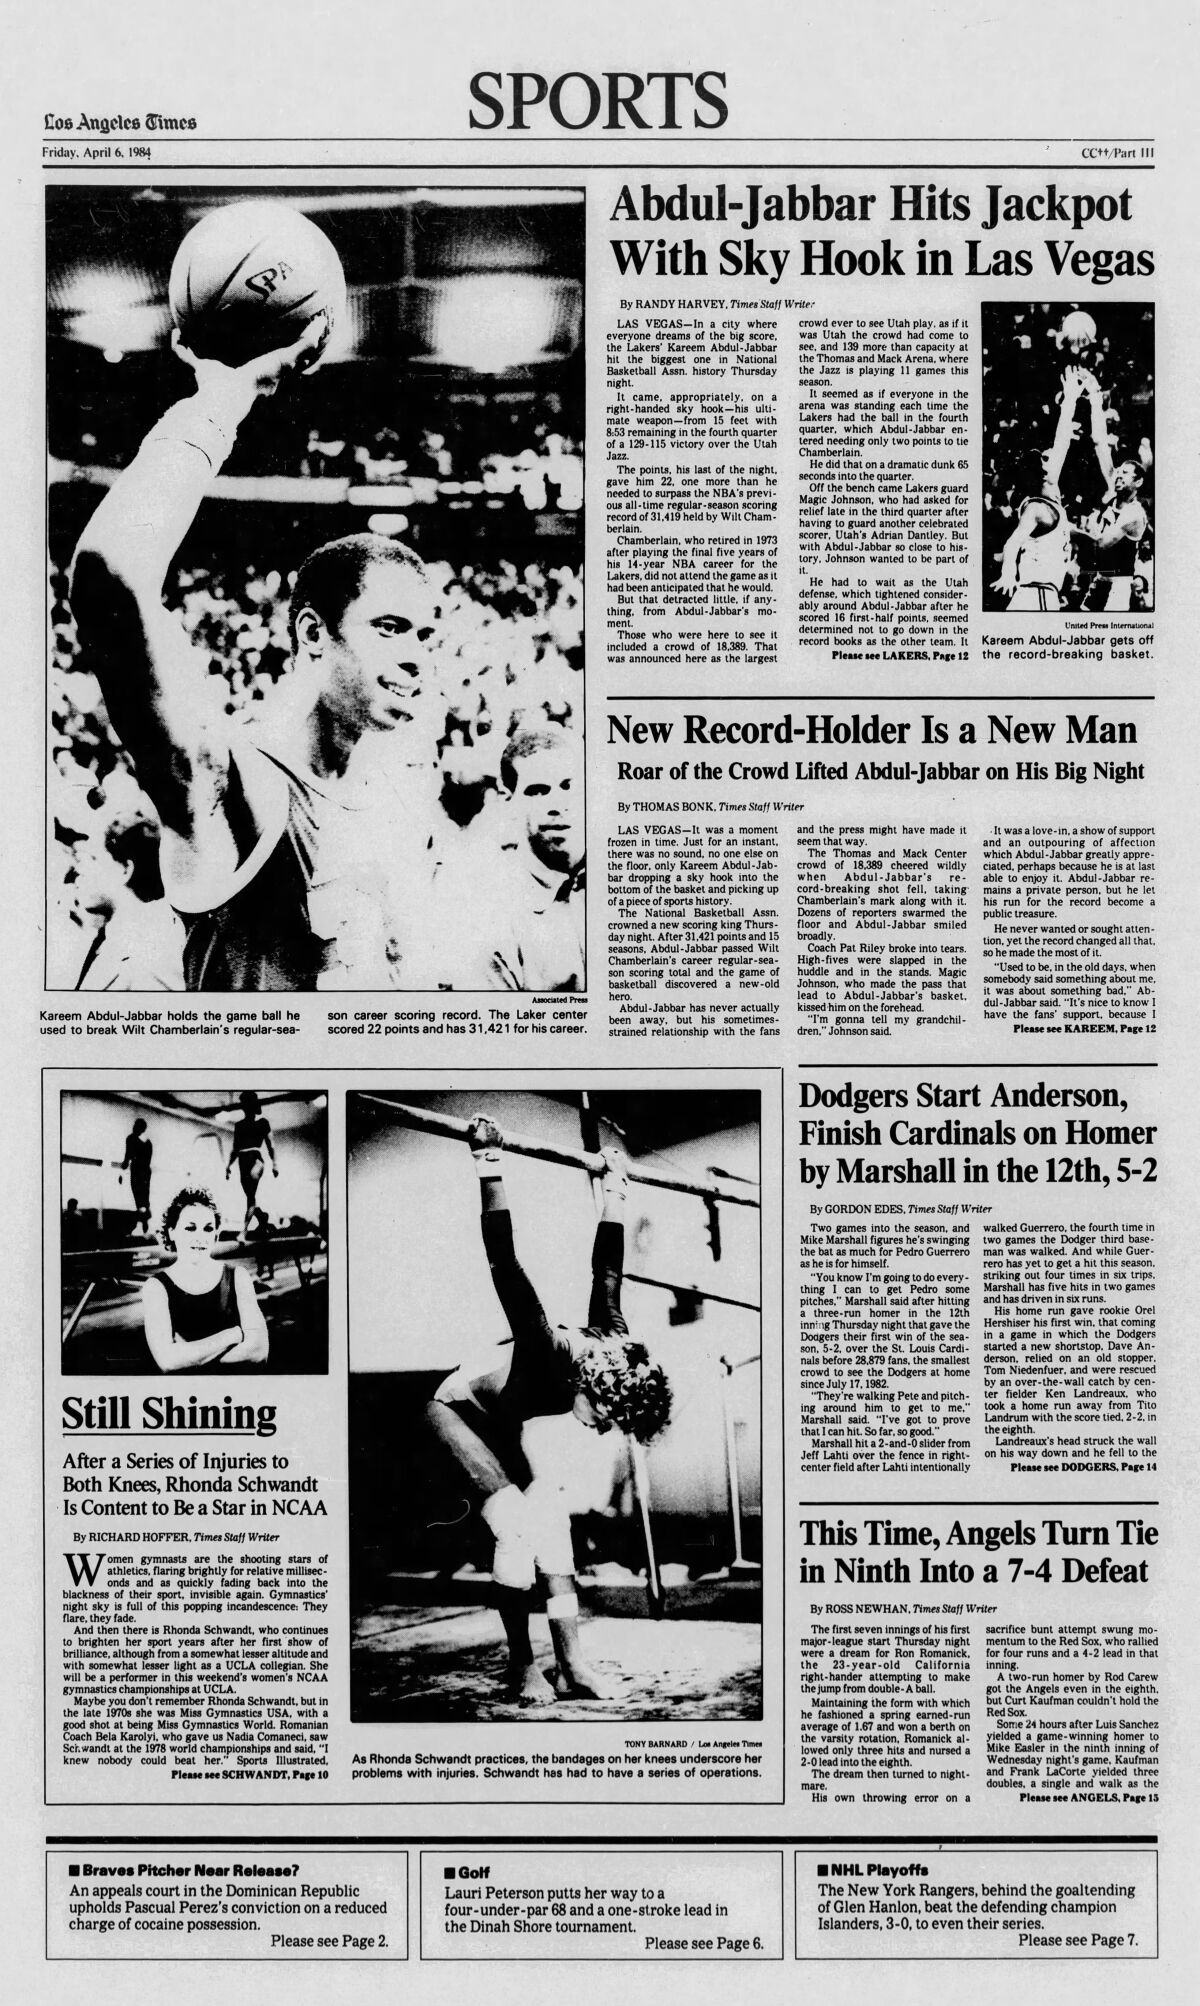 Los Angeles Times Sports cover for April 6, 1984. On April 5, 1984.